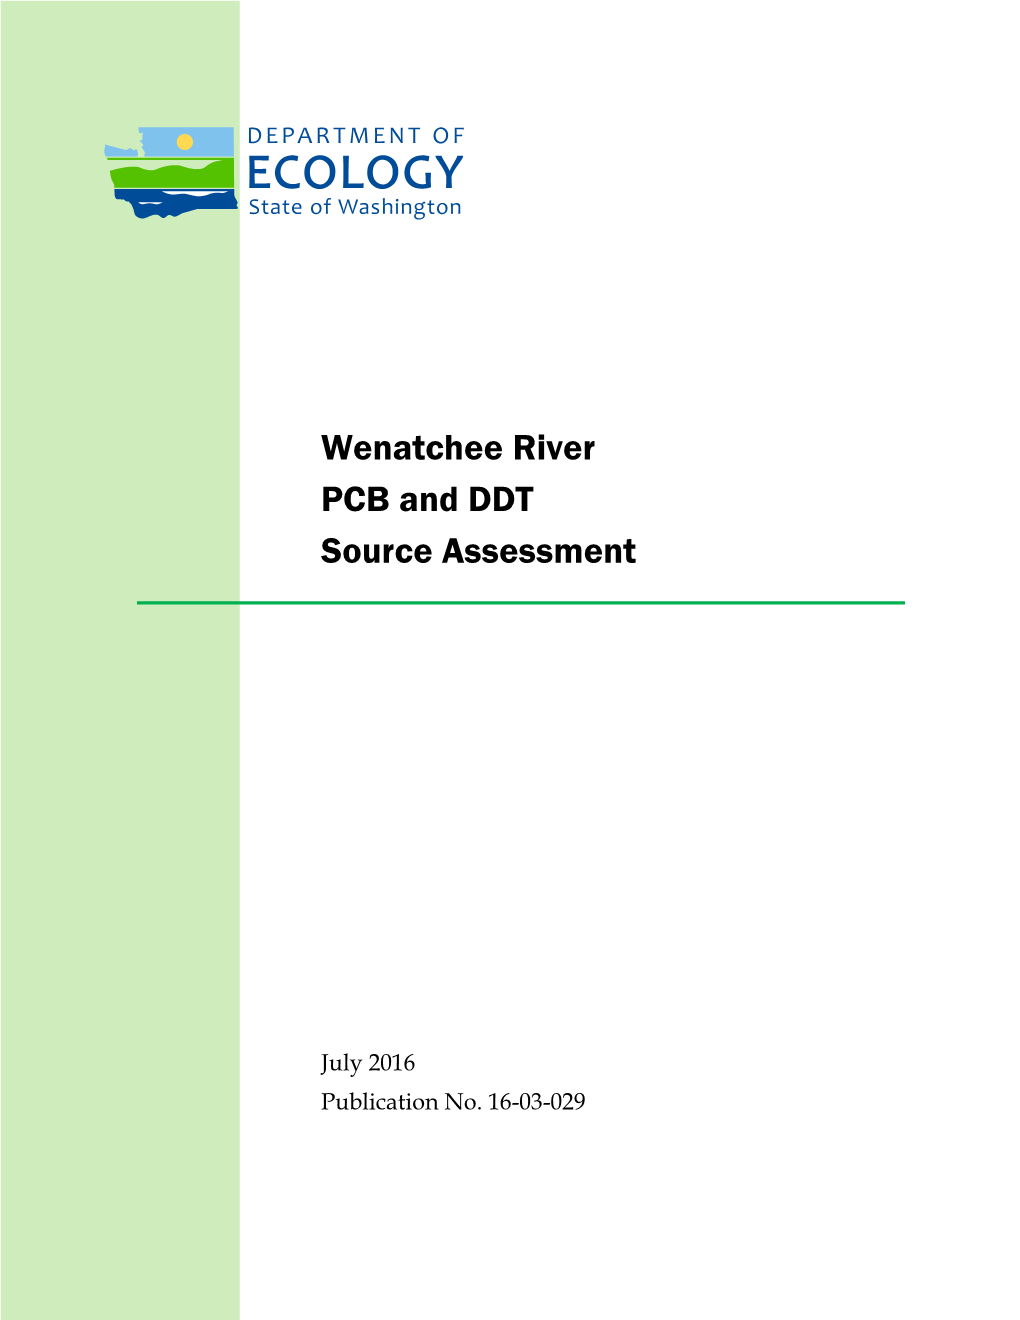 Wenatchee River PCB and DDT Source Assessment